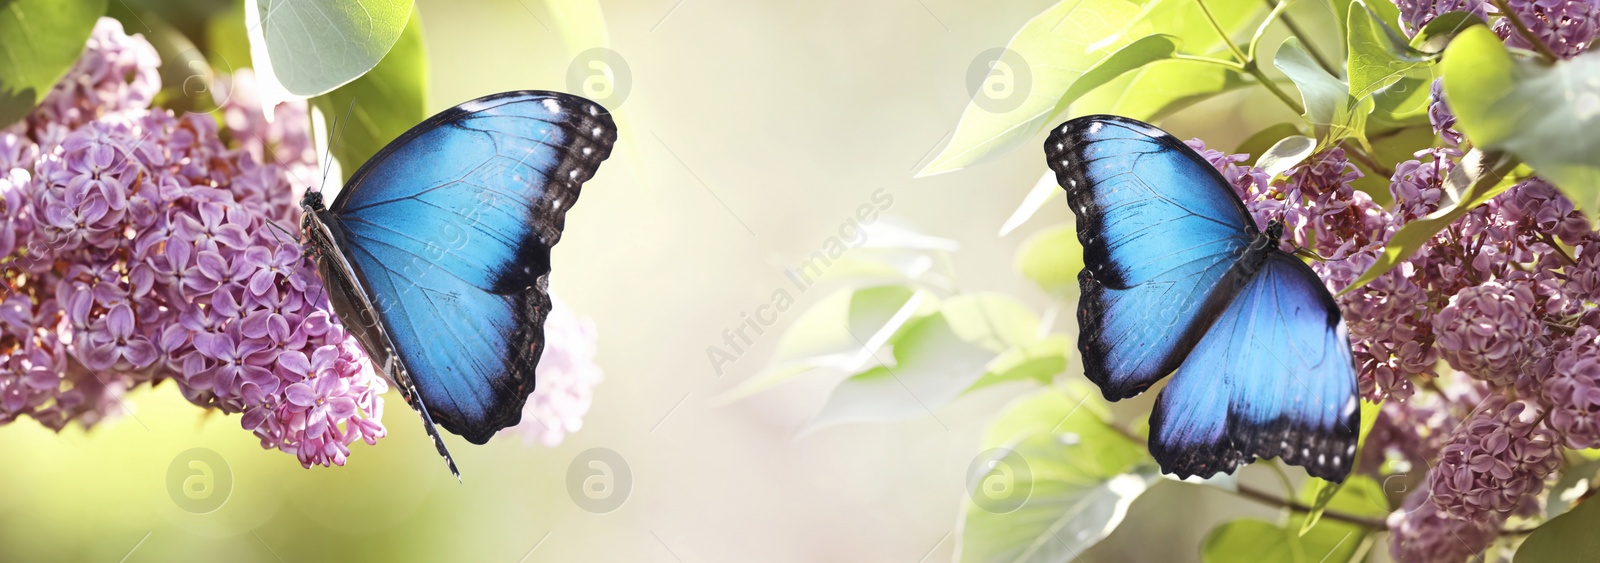 Image of Amazing common morpho butterflies on lilac flowers in garden, banner design